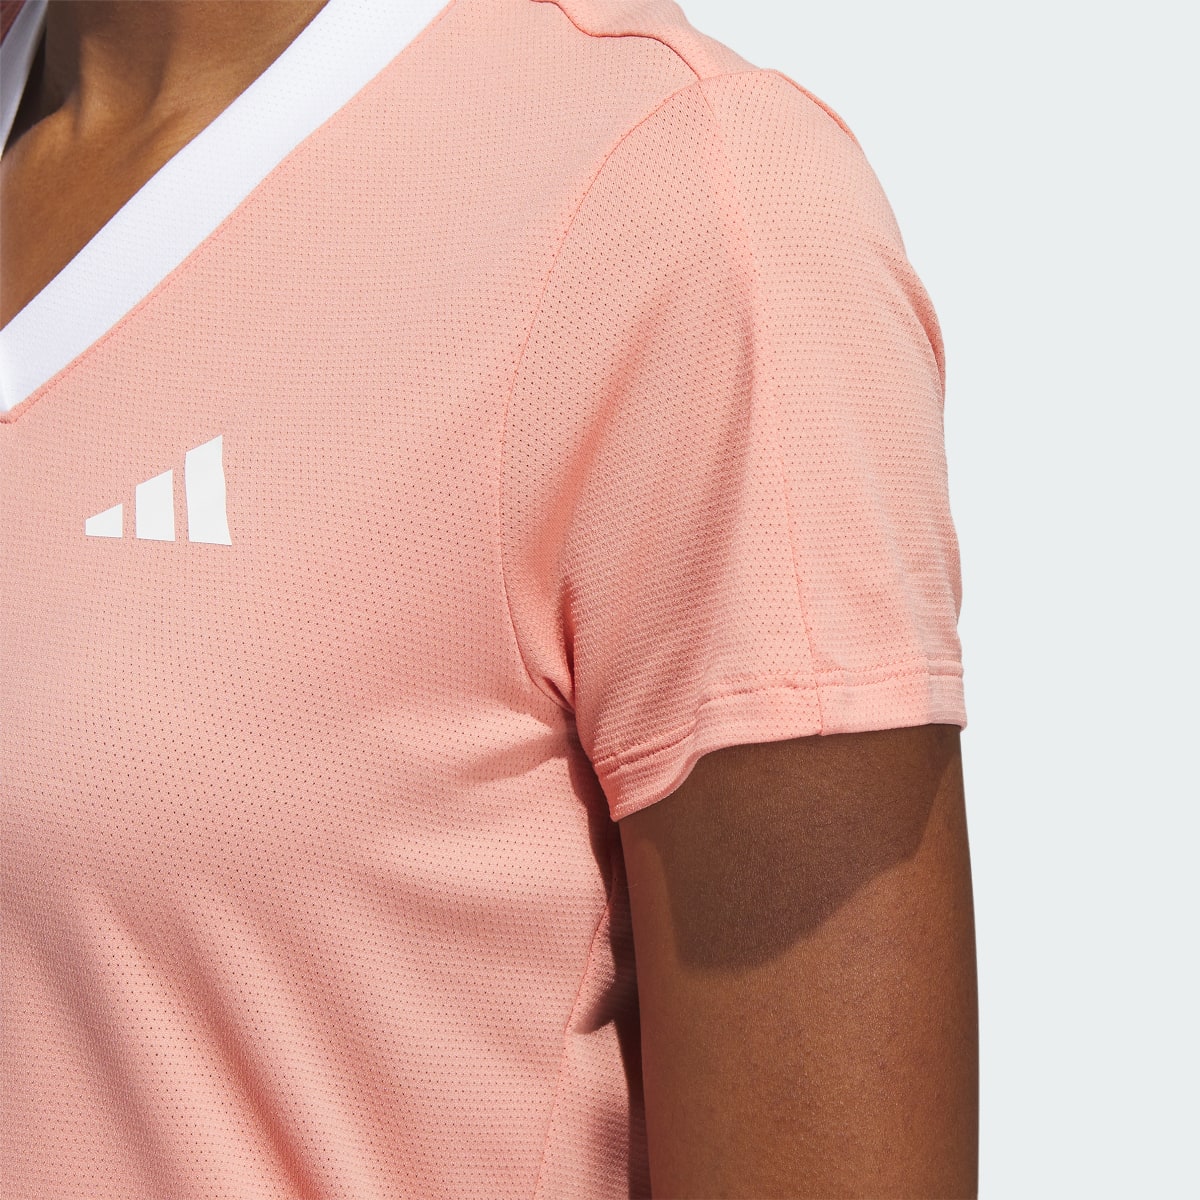 Adidas Made With Nature Golf Top. 6